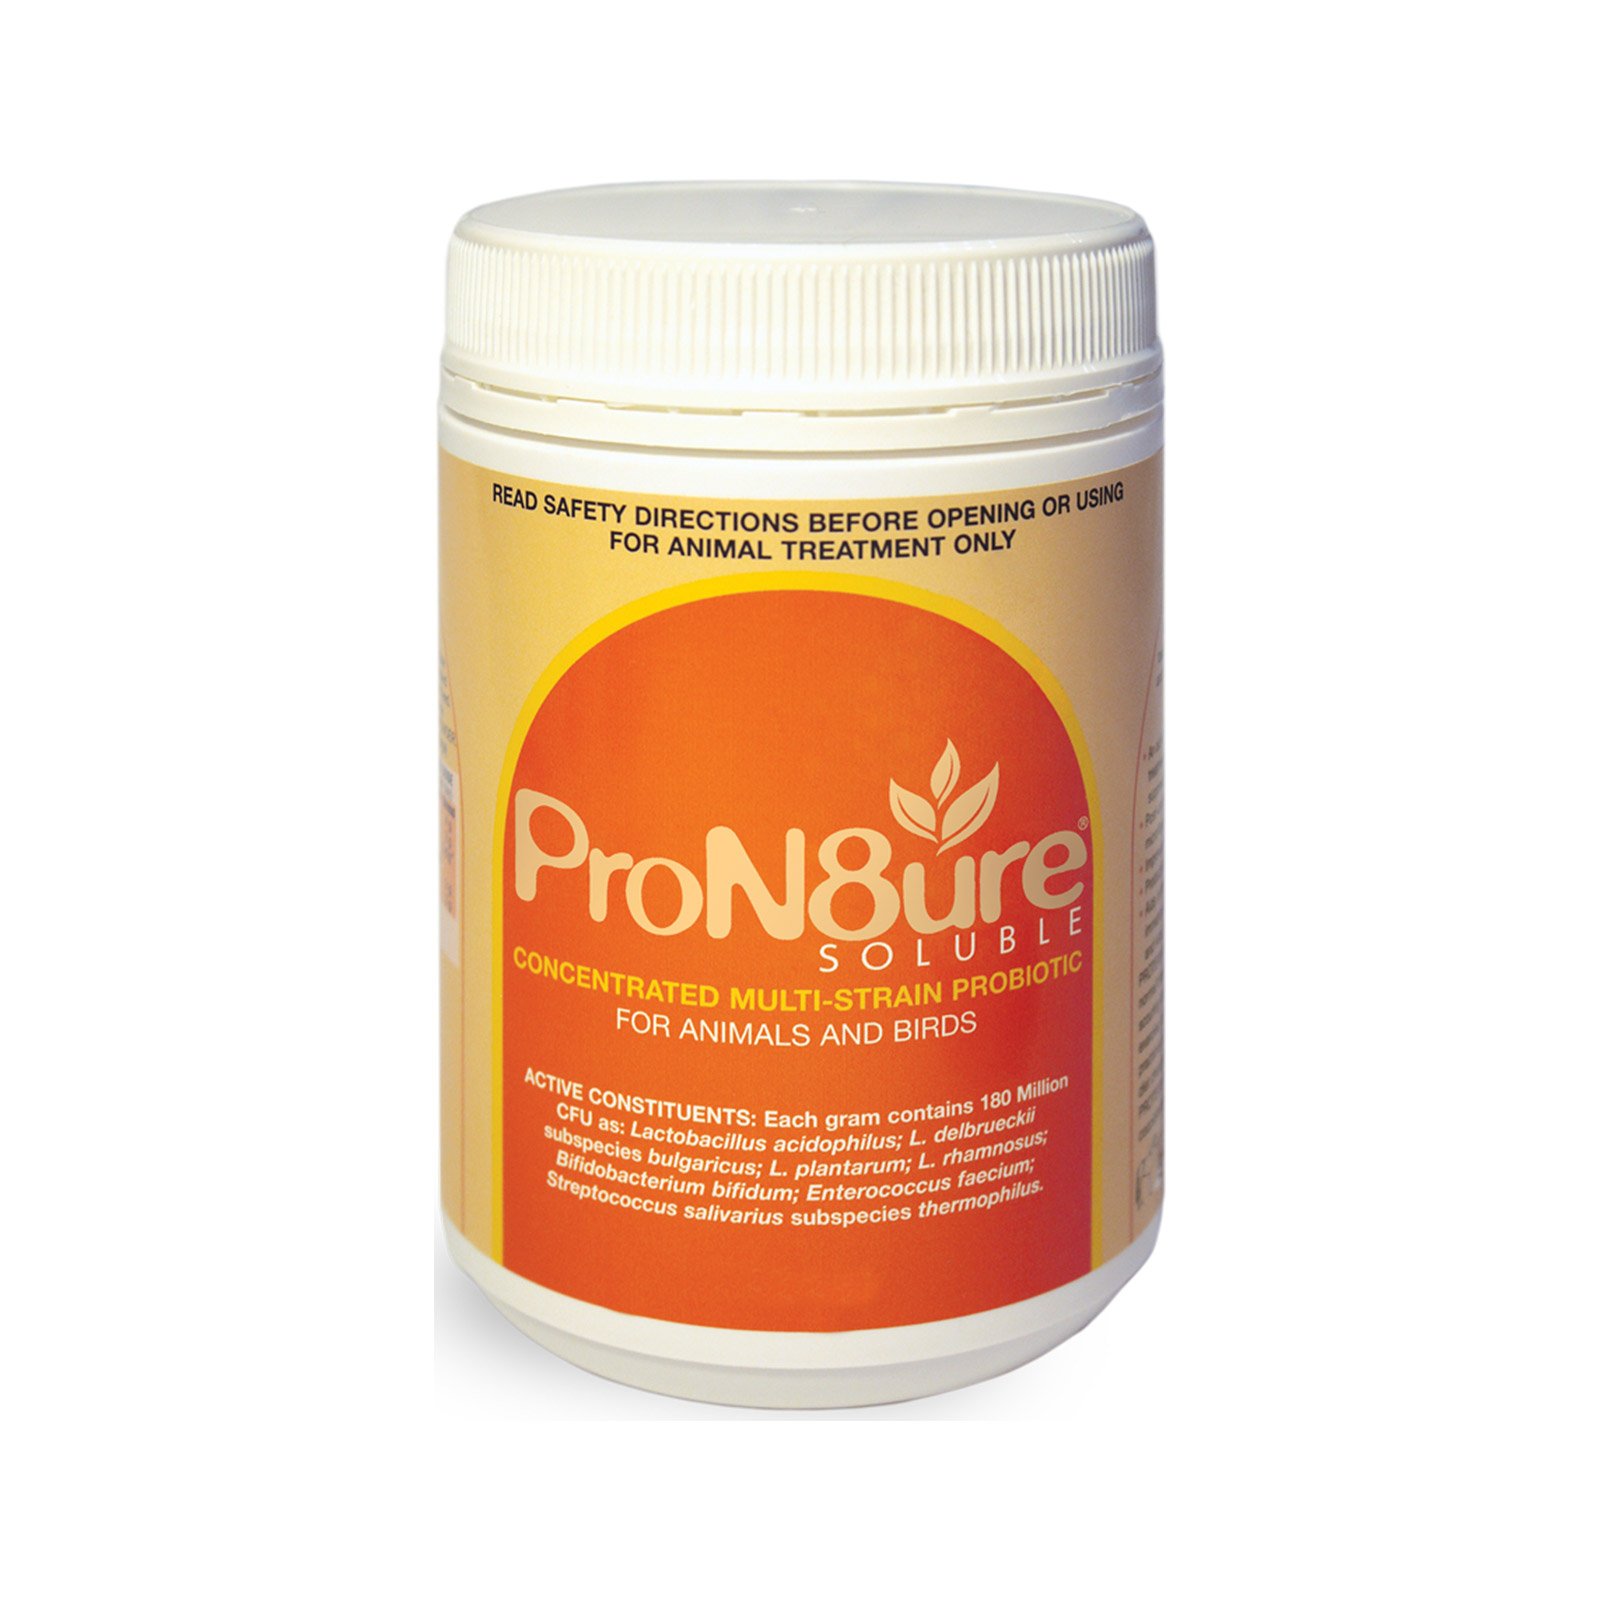 Pron8ure (Protexin) Soluble  125 Gm